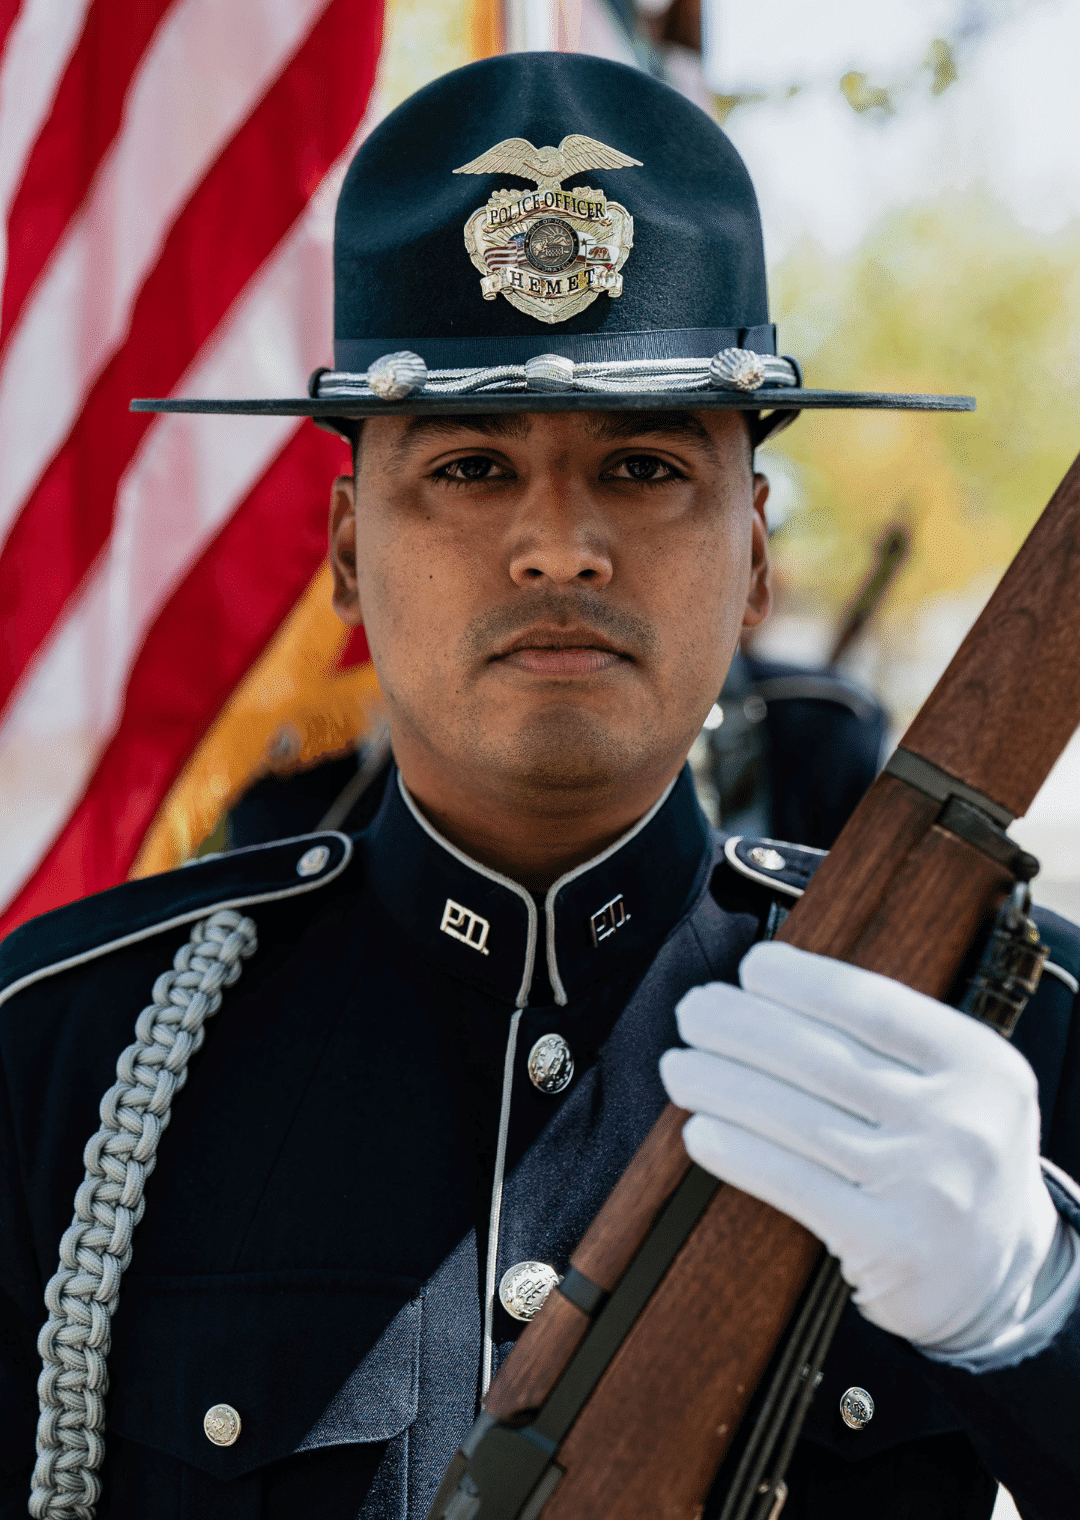 A Hemet Police. Honor Guard member holds a ceremonial rifle across his chest